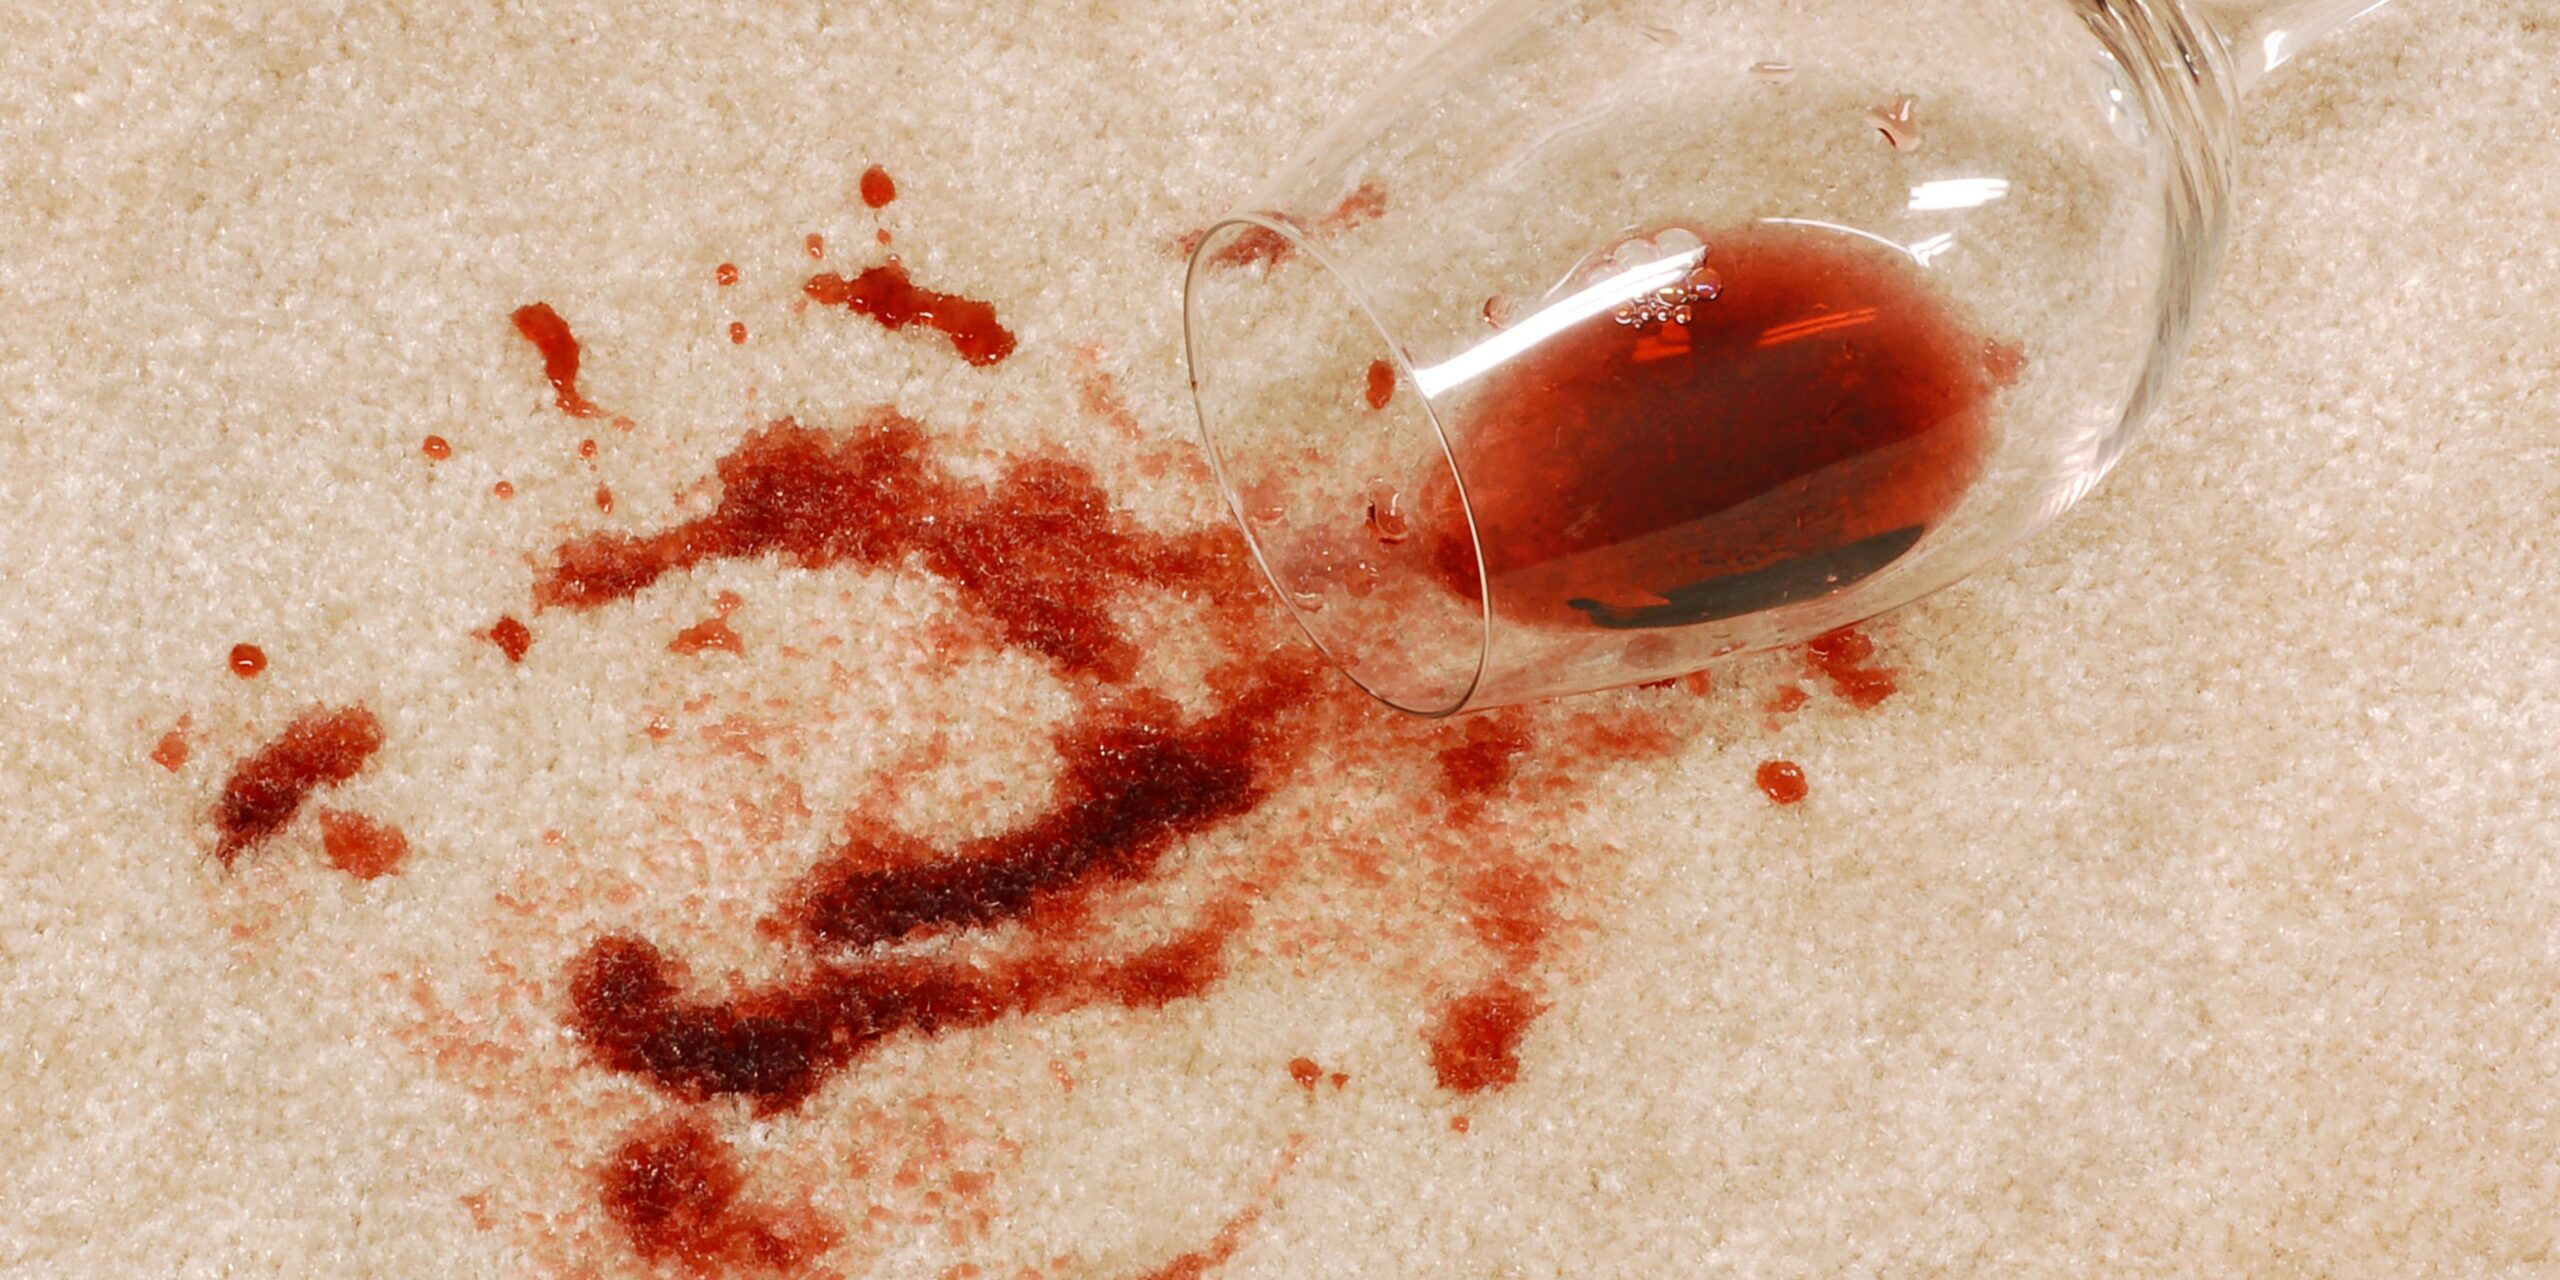 How to Get Red Wine Out of a Carpet